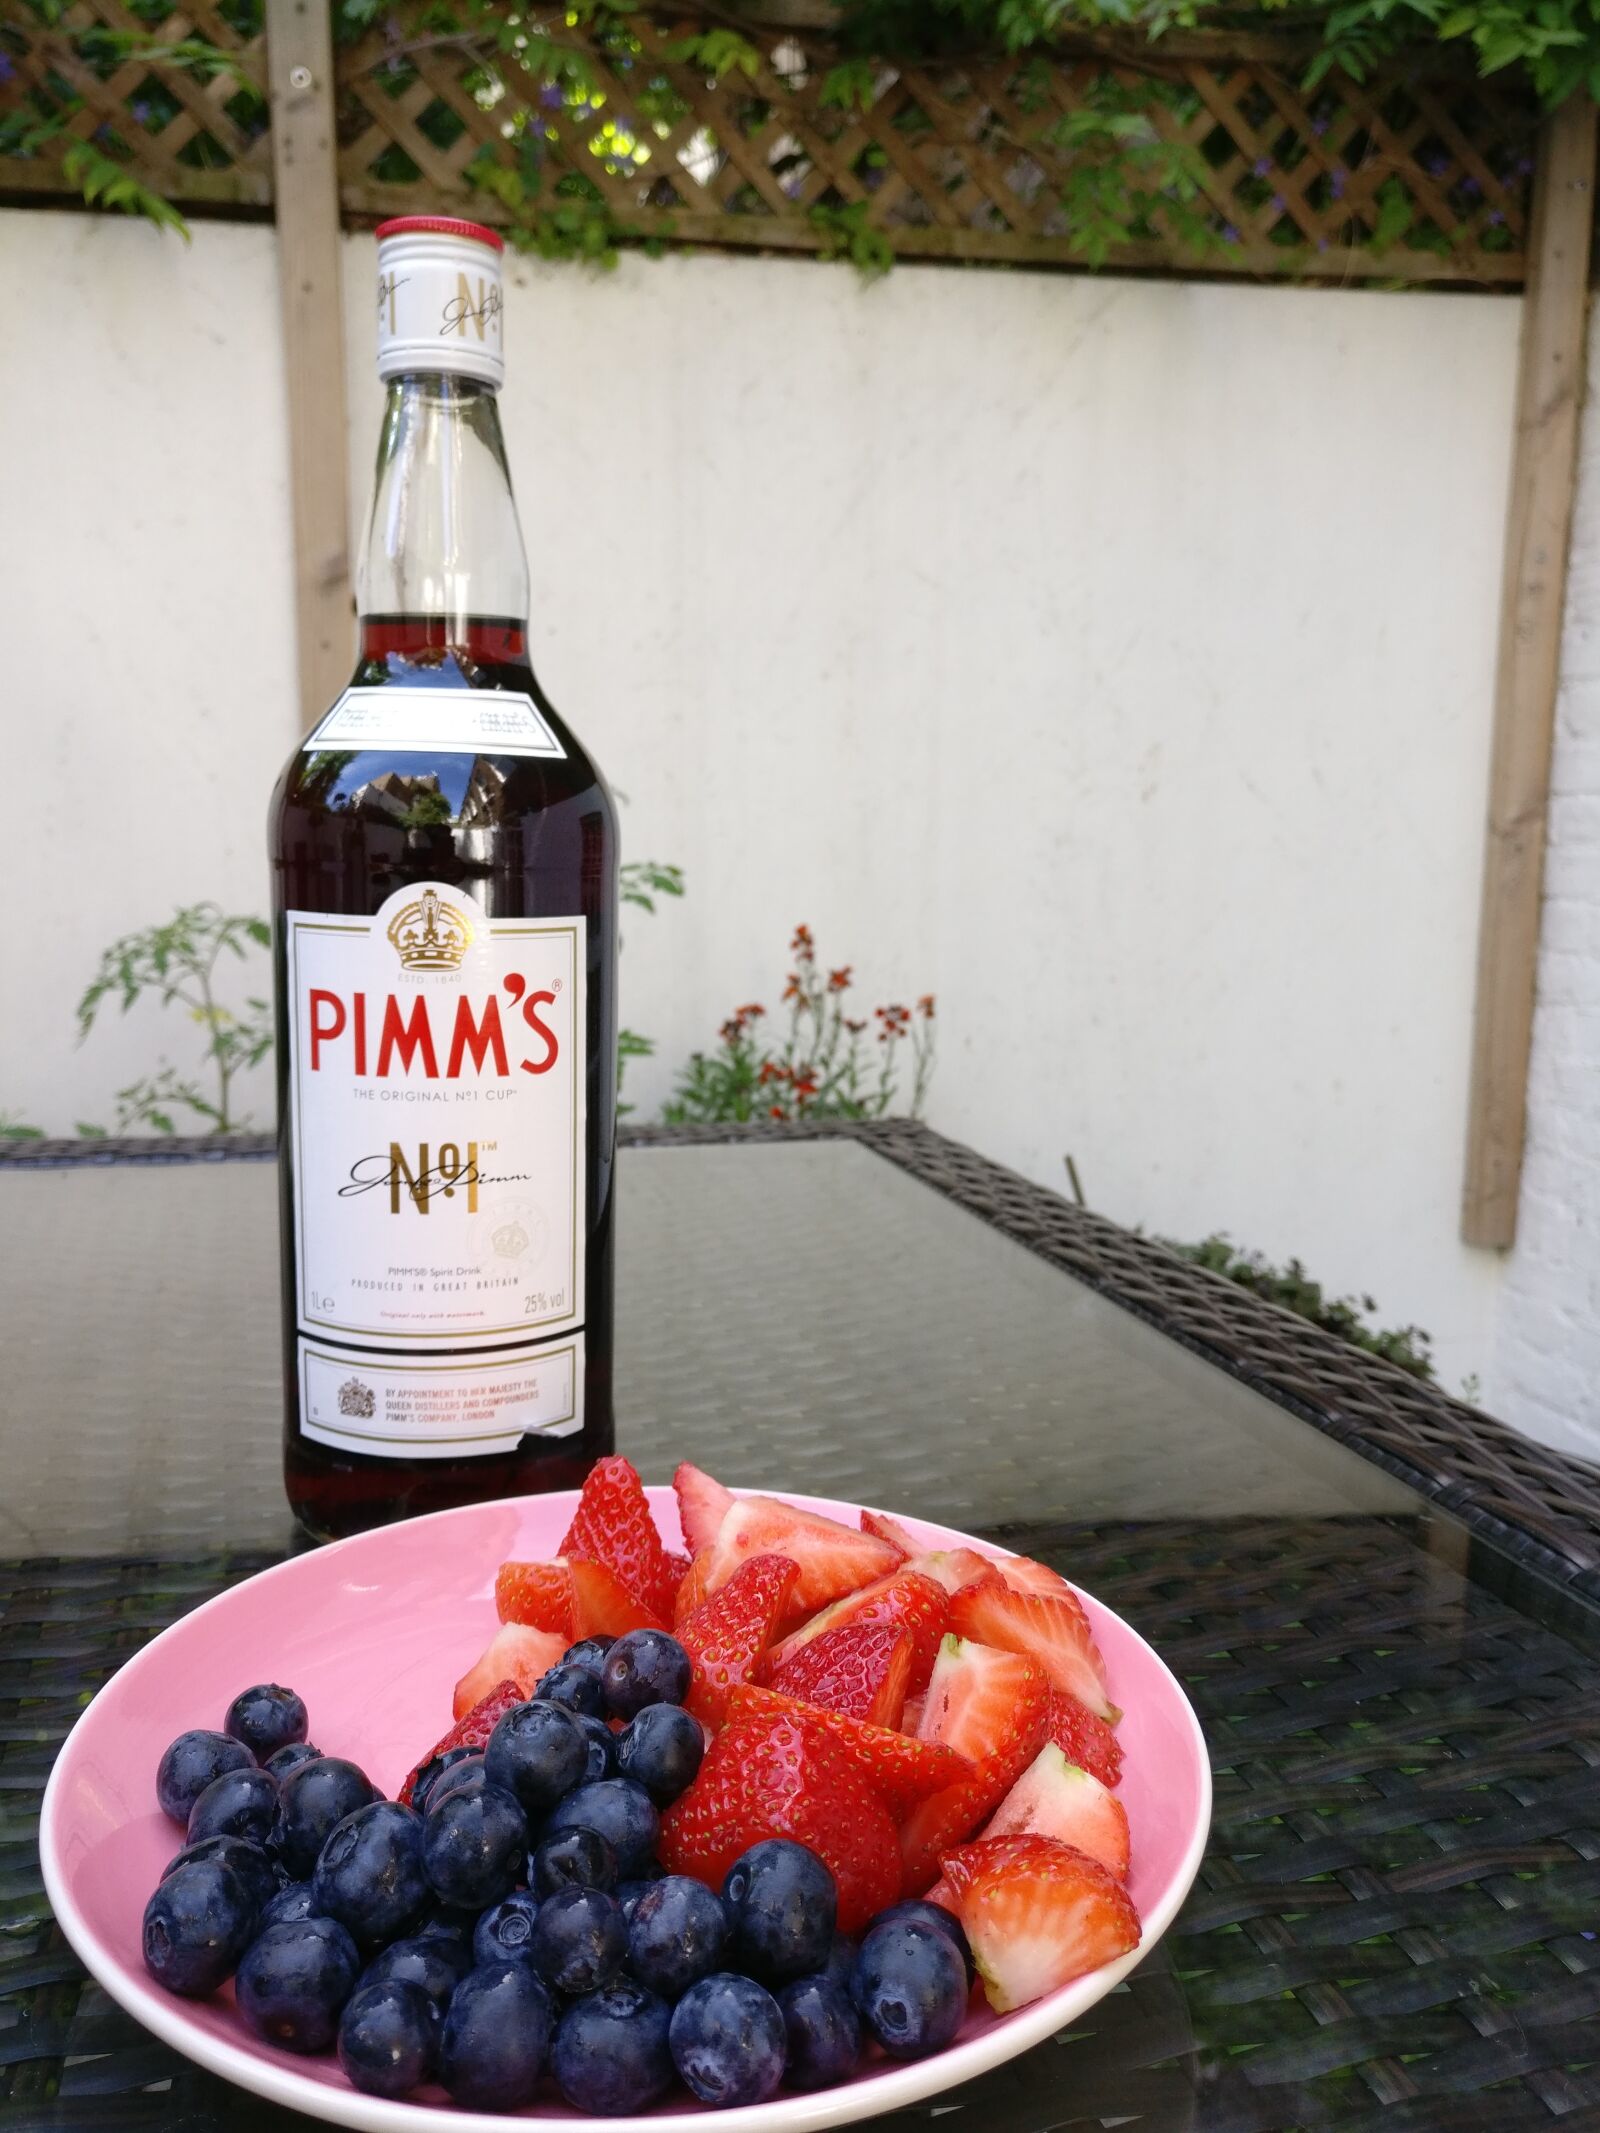 OnePlus A3003 sample photo. Bottle, pimm, s, and photography